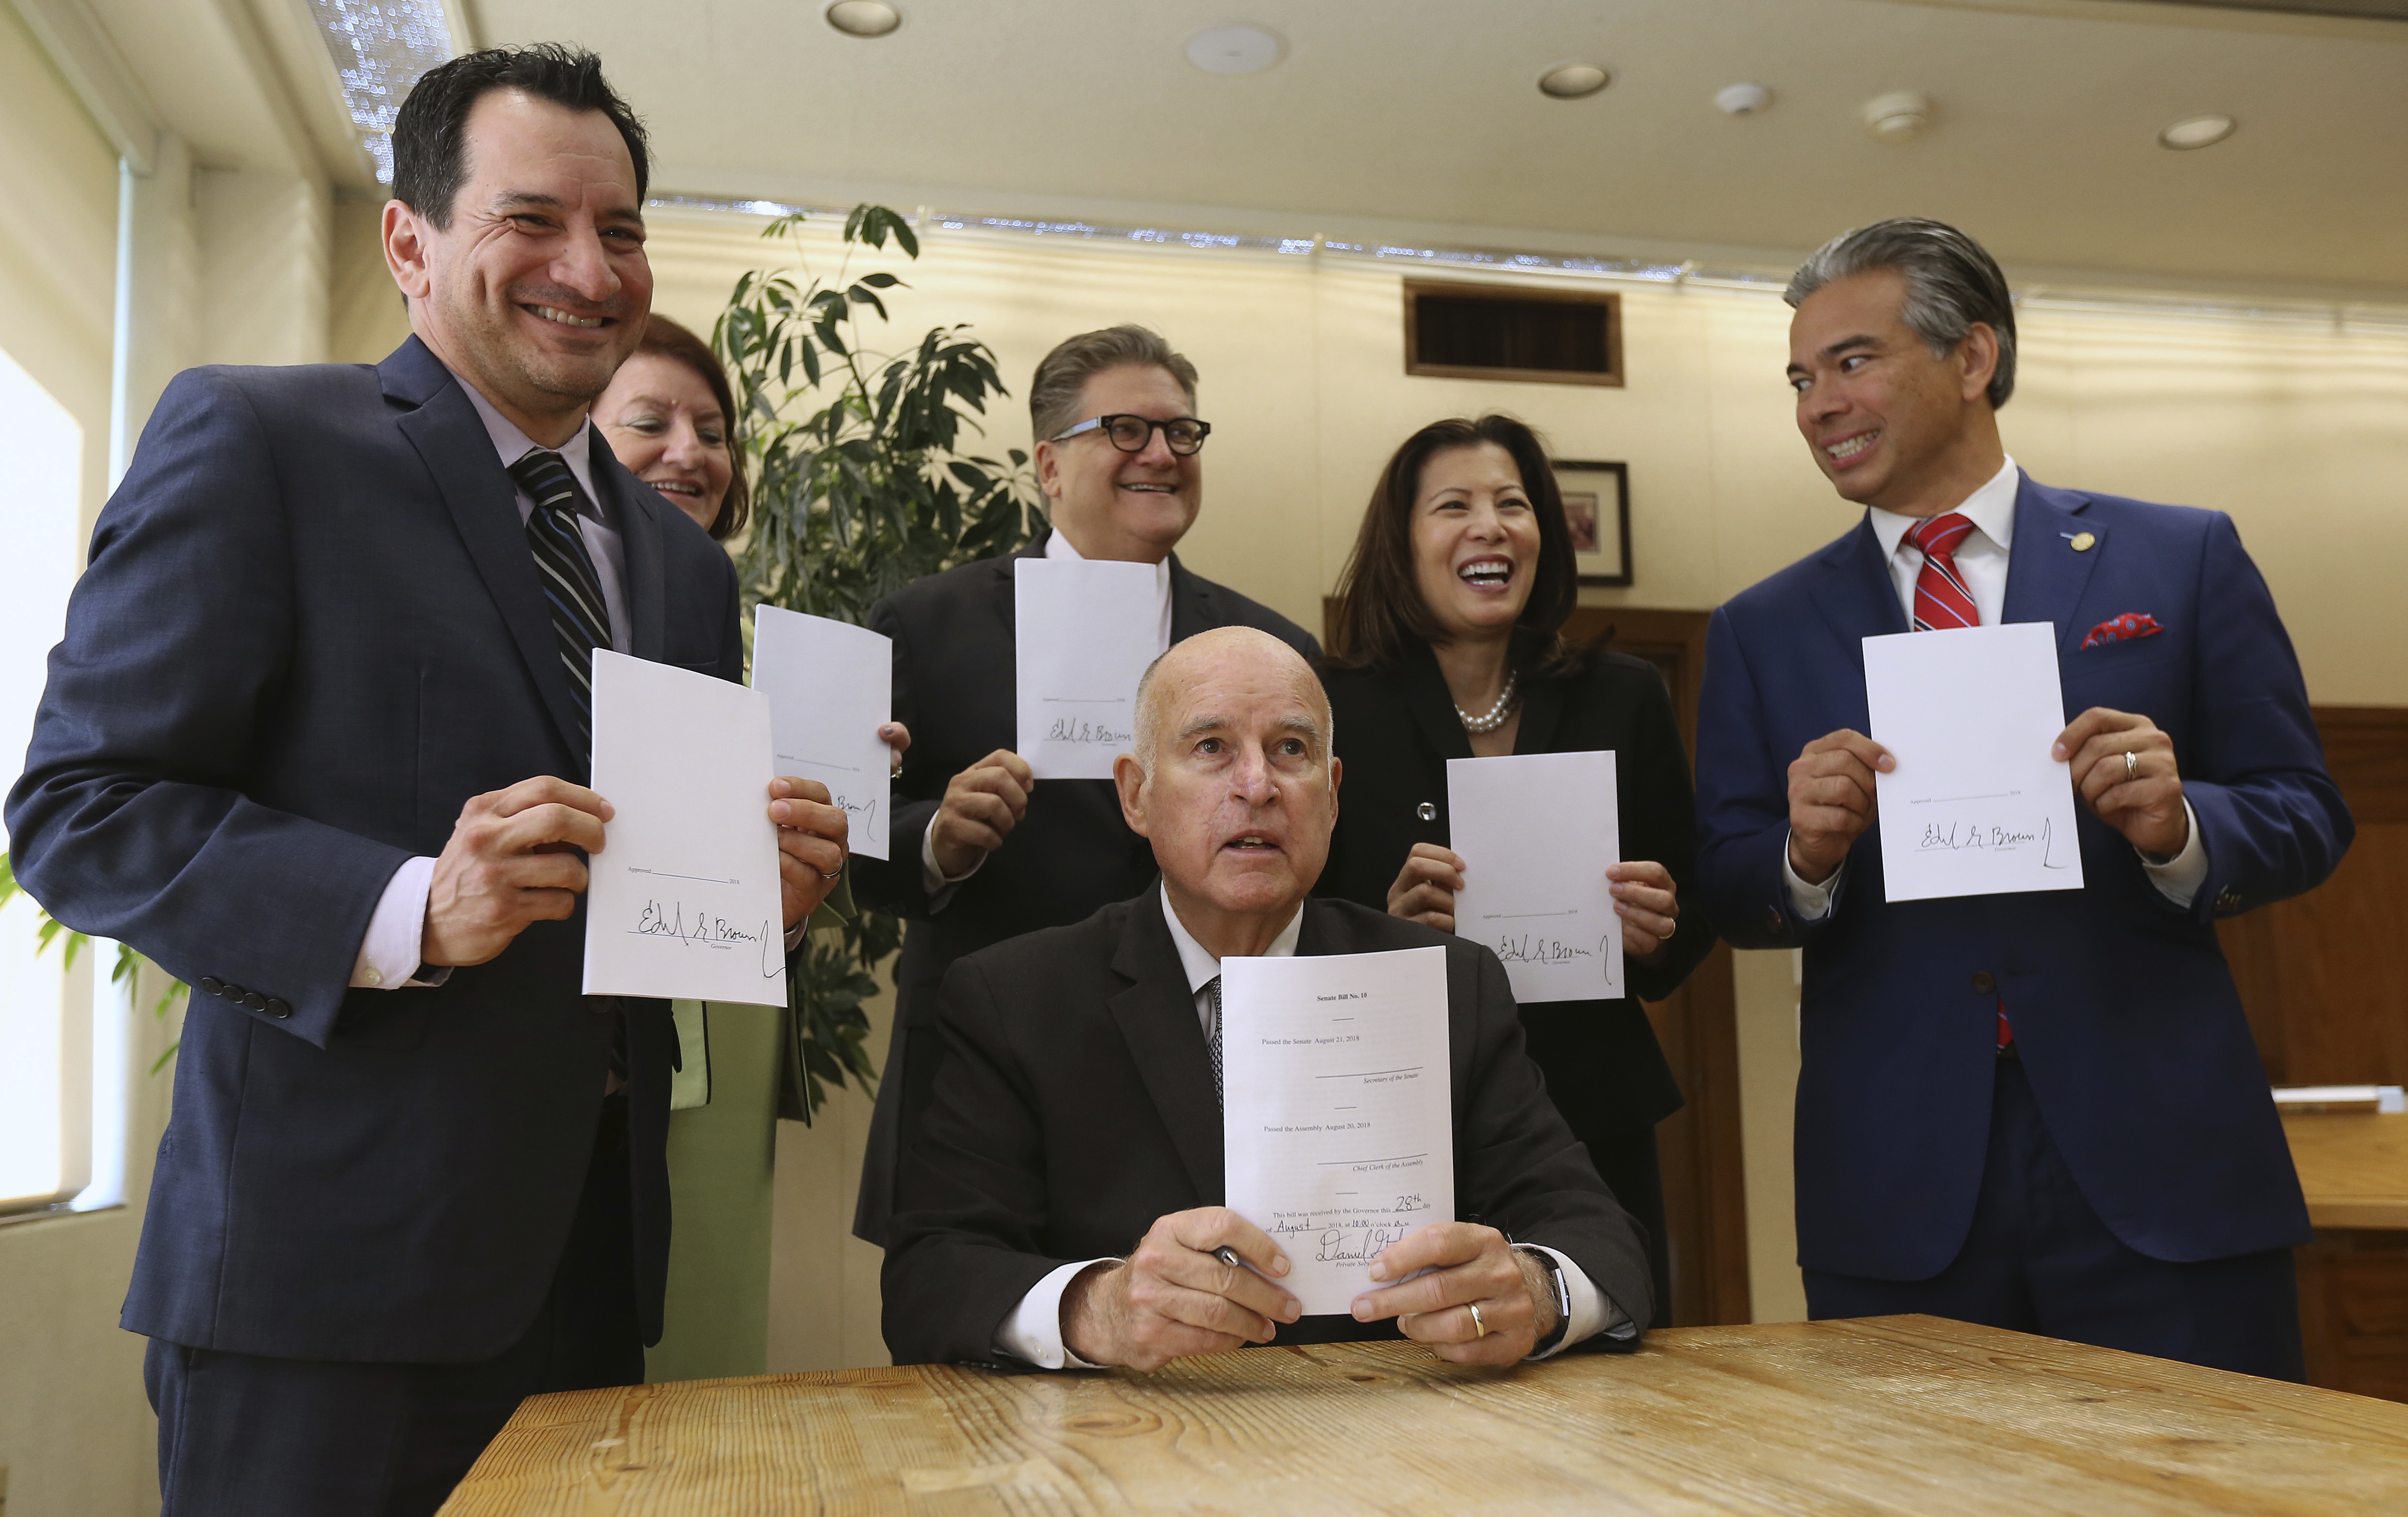 California Just Became the First State to End Bail. Here’s What You Need to Know